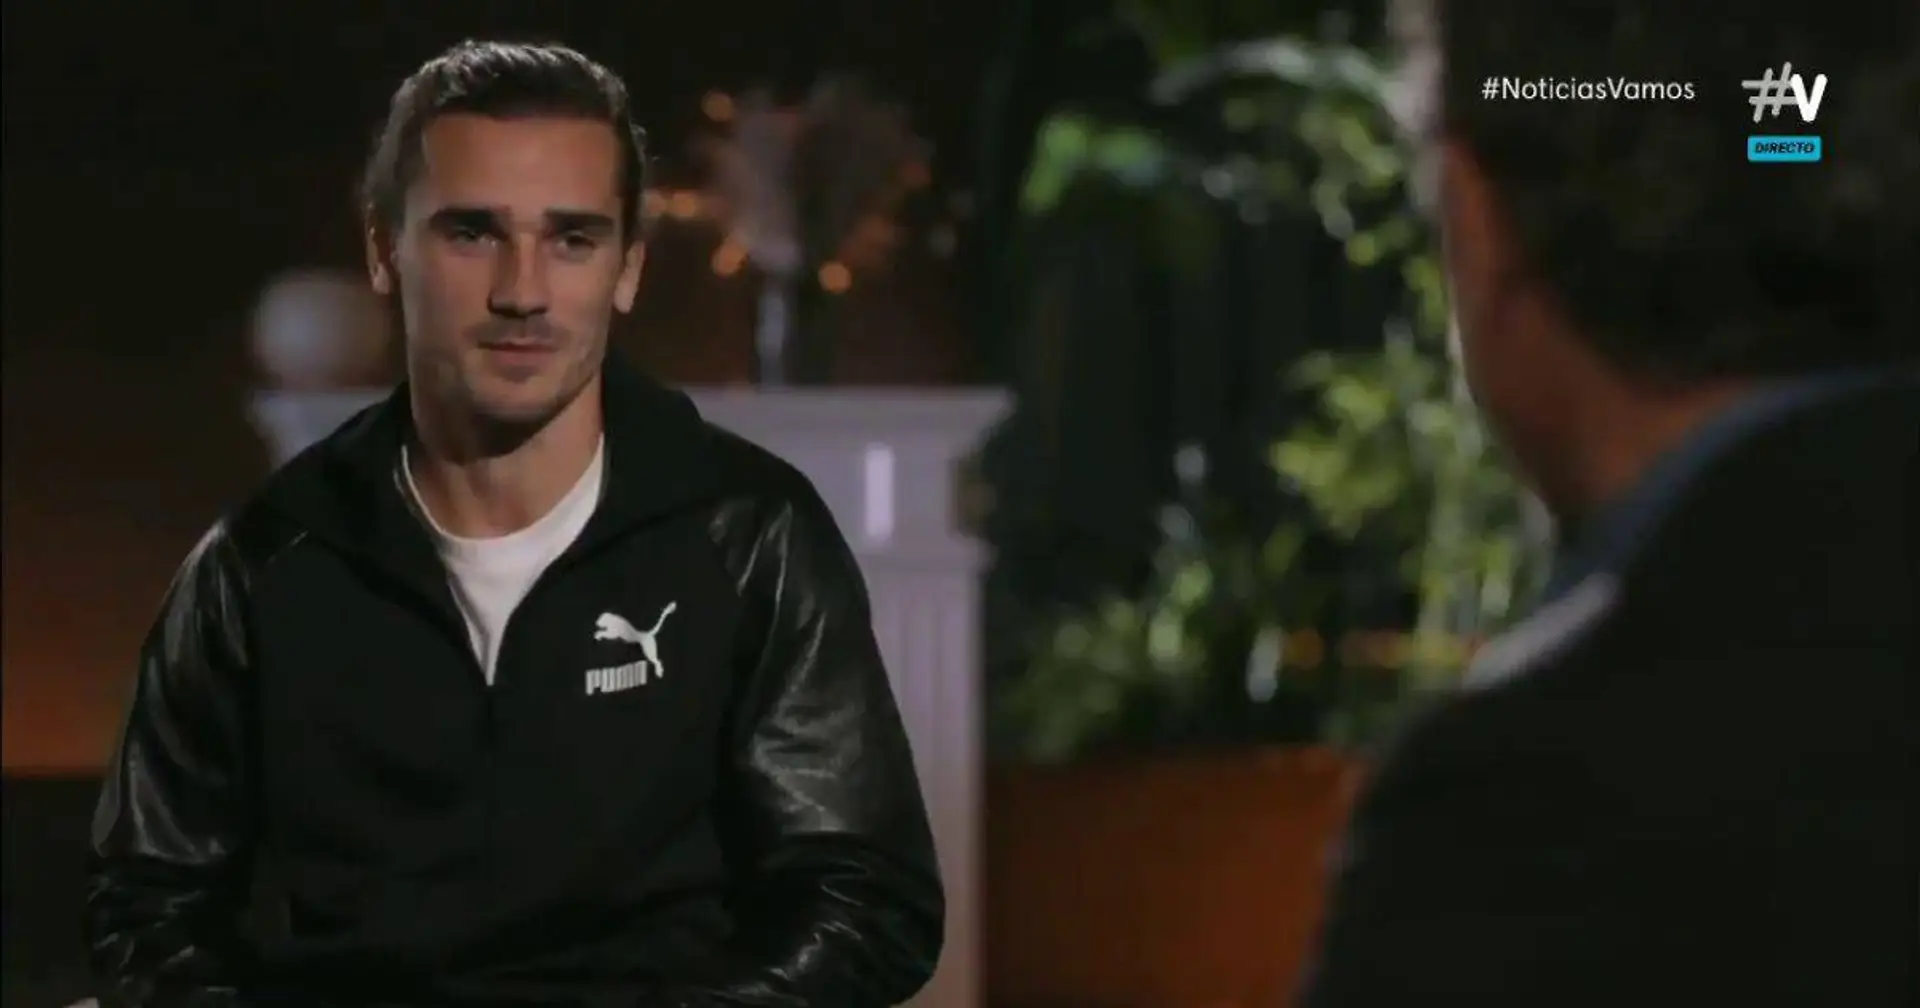 Try a backheel & 2 more pieces of advice Valdano gave Griezmann before THAT interview